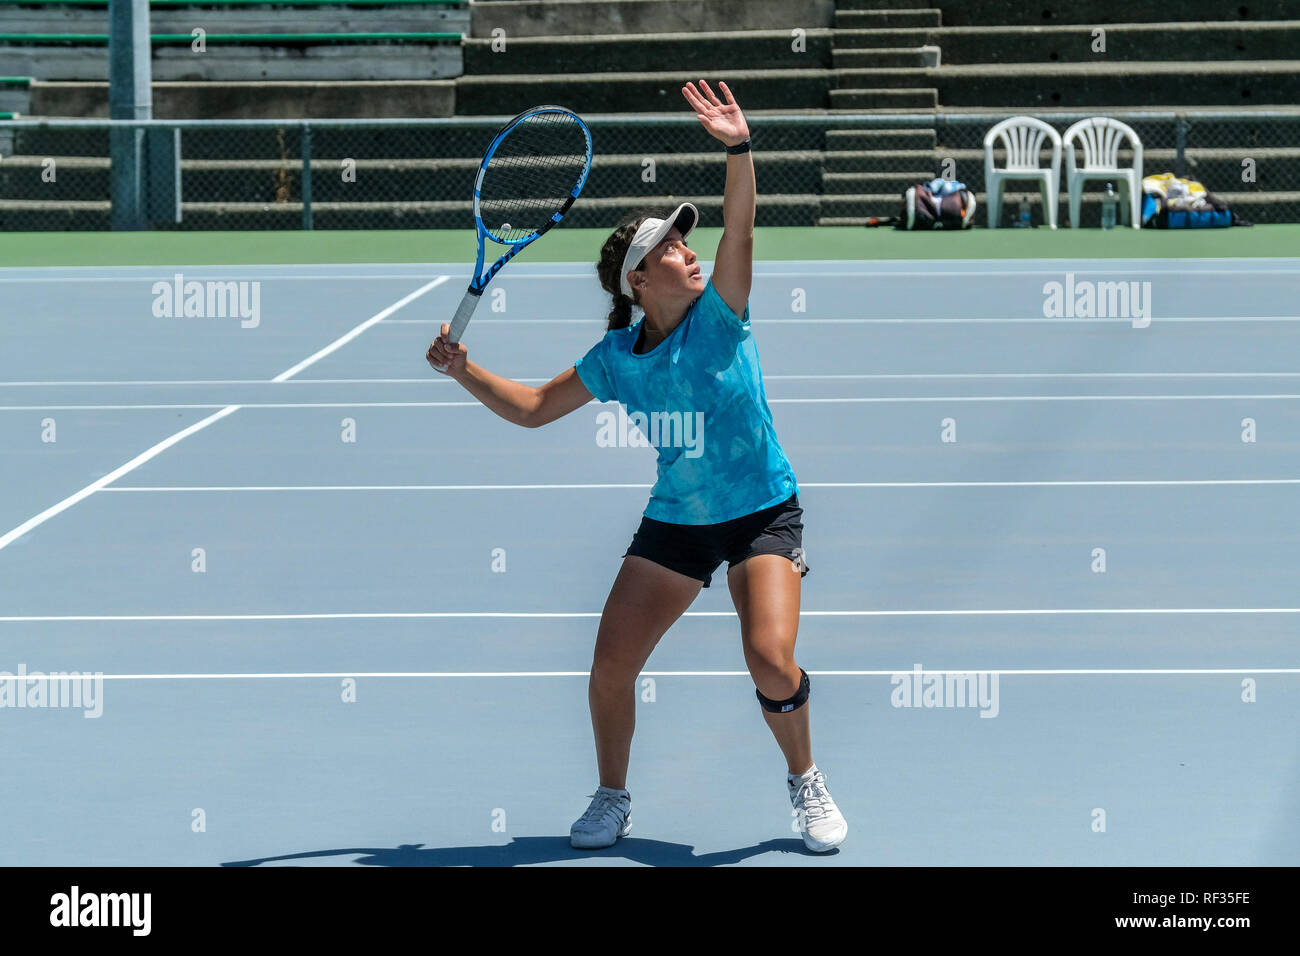 Wellington, New Zealand. 24th January, 2019. Saoirse Breen of Fiji competes with doubles partner Elena Micic of Australia against Katja Wiersholm and Jennifer Kida of the USA during the girls' doubles quarterfinal at the 2019 Tecnifibre Wellington ITF Junior Tennis Tournament. Credit: Rainer Macalister/Alamy Live News Stock Photo